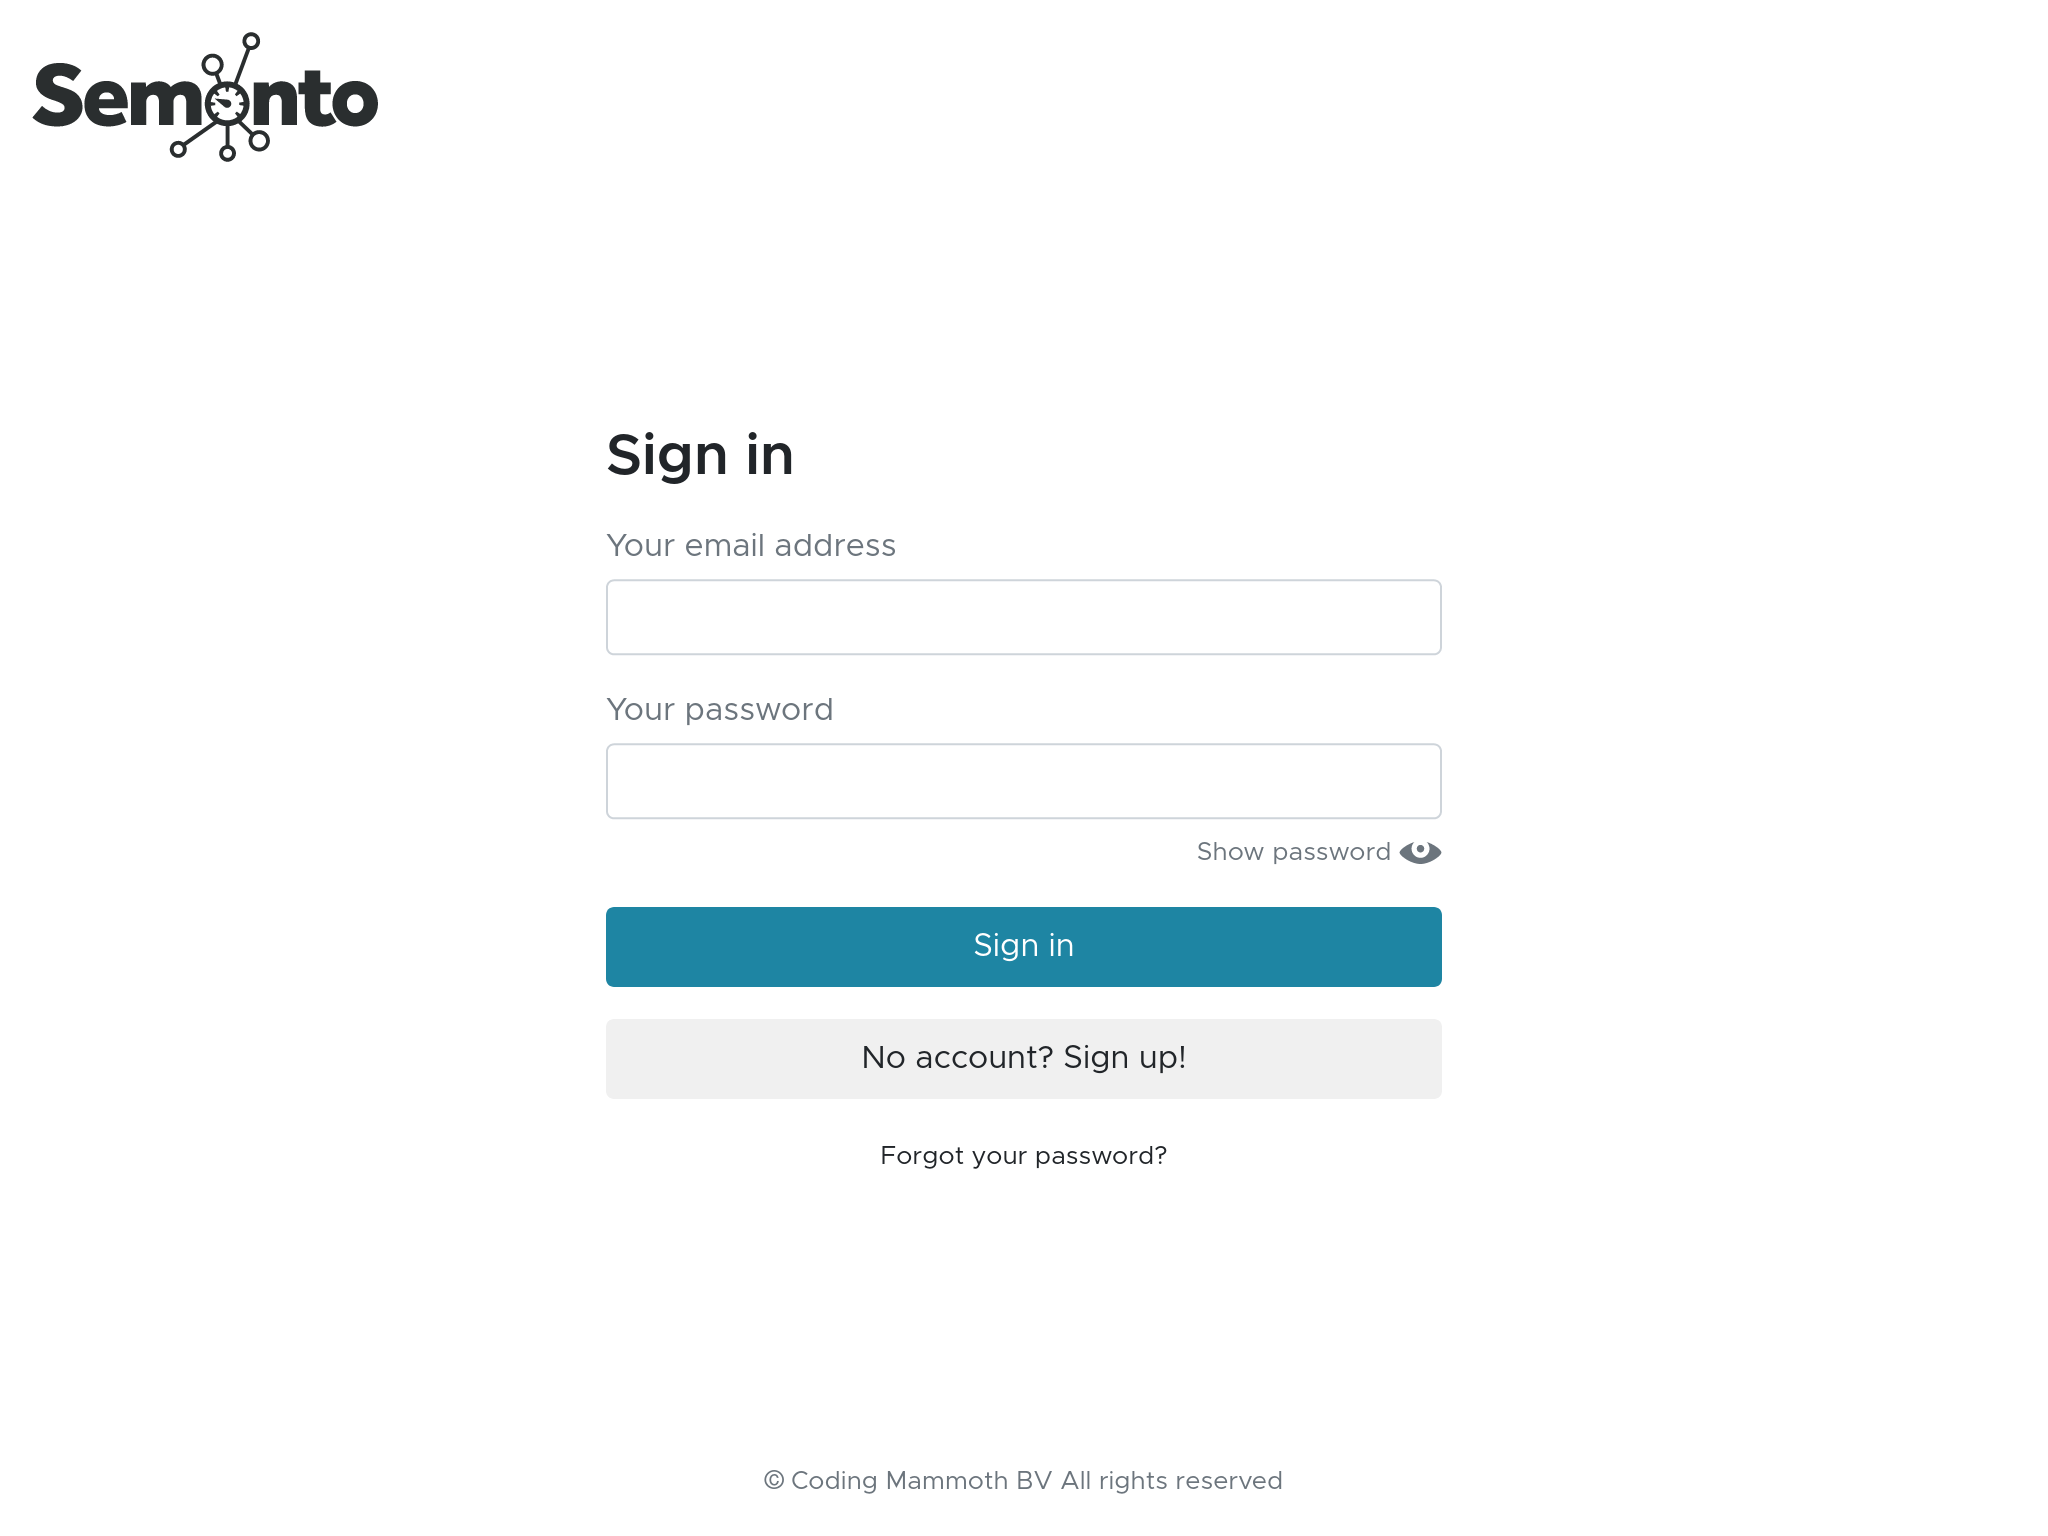 The new login page